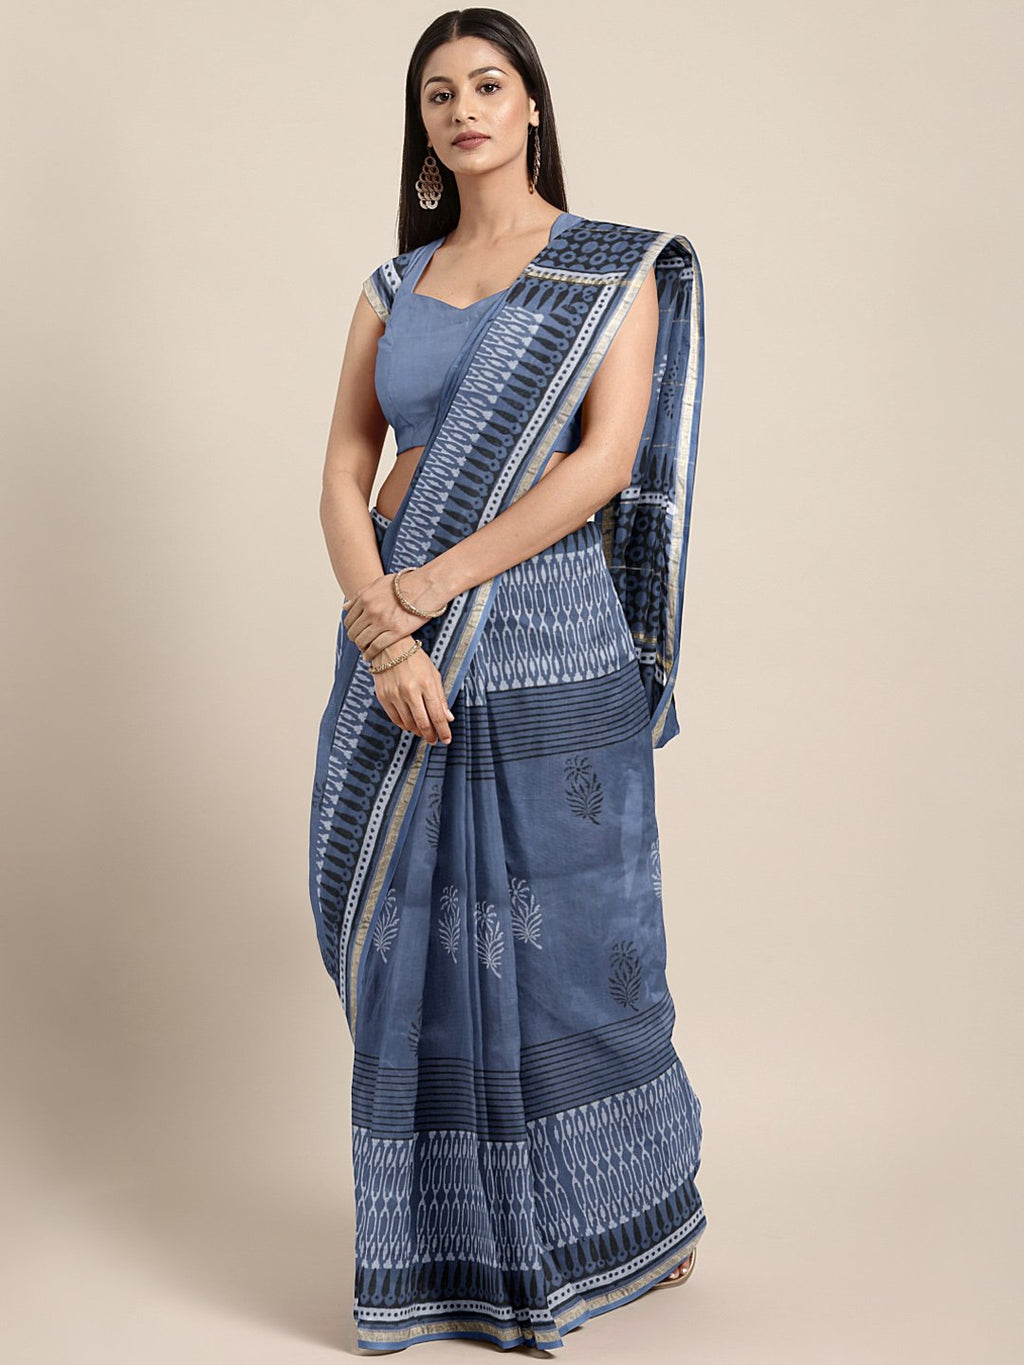 Navy Blue & White Handblock Print Handcrafted Chanderi Saree-Saree-Kalakari India-BHKPSA0070-Chanderi, Dabu, Geographical Indication, Hand Blocks, Hand Crafted, Heritage Prints, Indigo, Natural Dyes, Sarees, Sustainable Fabrics-[Linen,Ethnic,wear,Fashionista,Handloom,Handicraft,Indigo,blockprint,block,print,Cotton,Chanderi,Blue, latest,classy,party,bollywood,trendy,summer,style,traditional,formal,elegant,unique,style,hand,block,print, dabu,booti,gift,present,glamorous,affordable,collectible,Sari